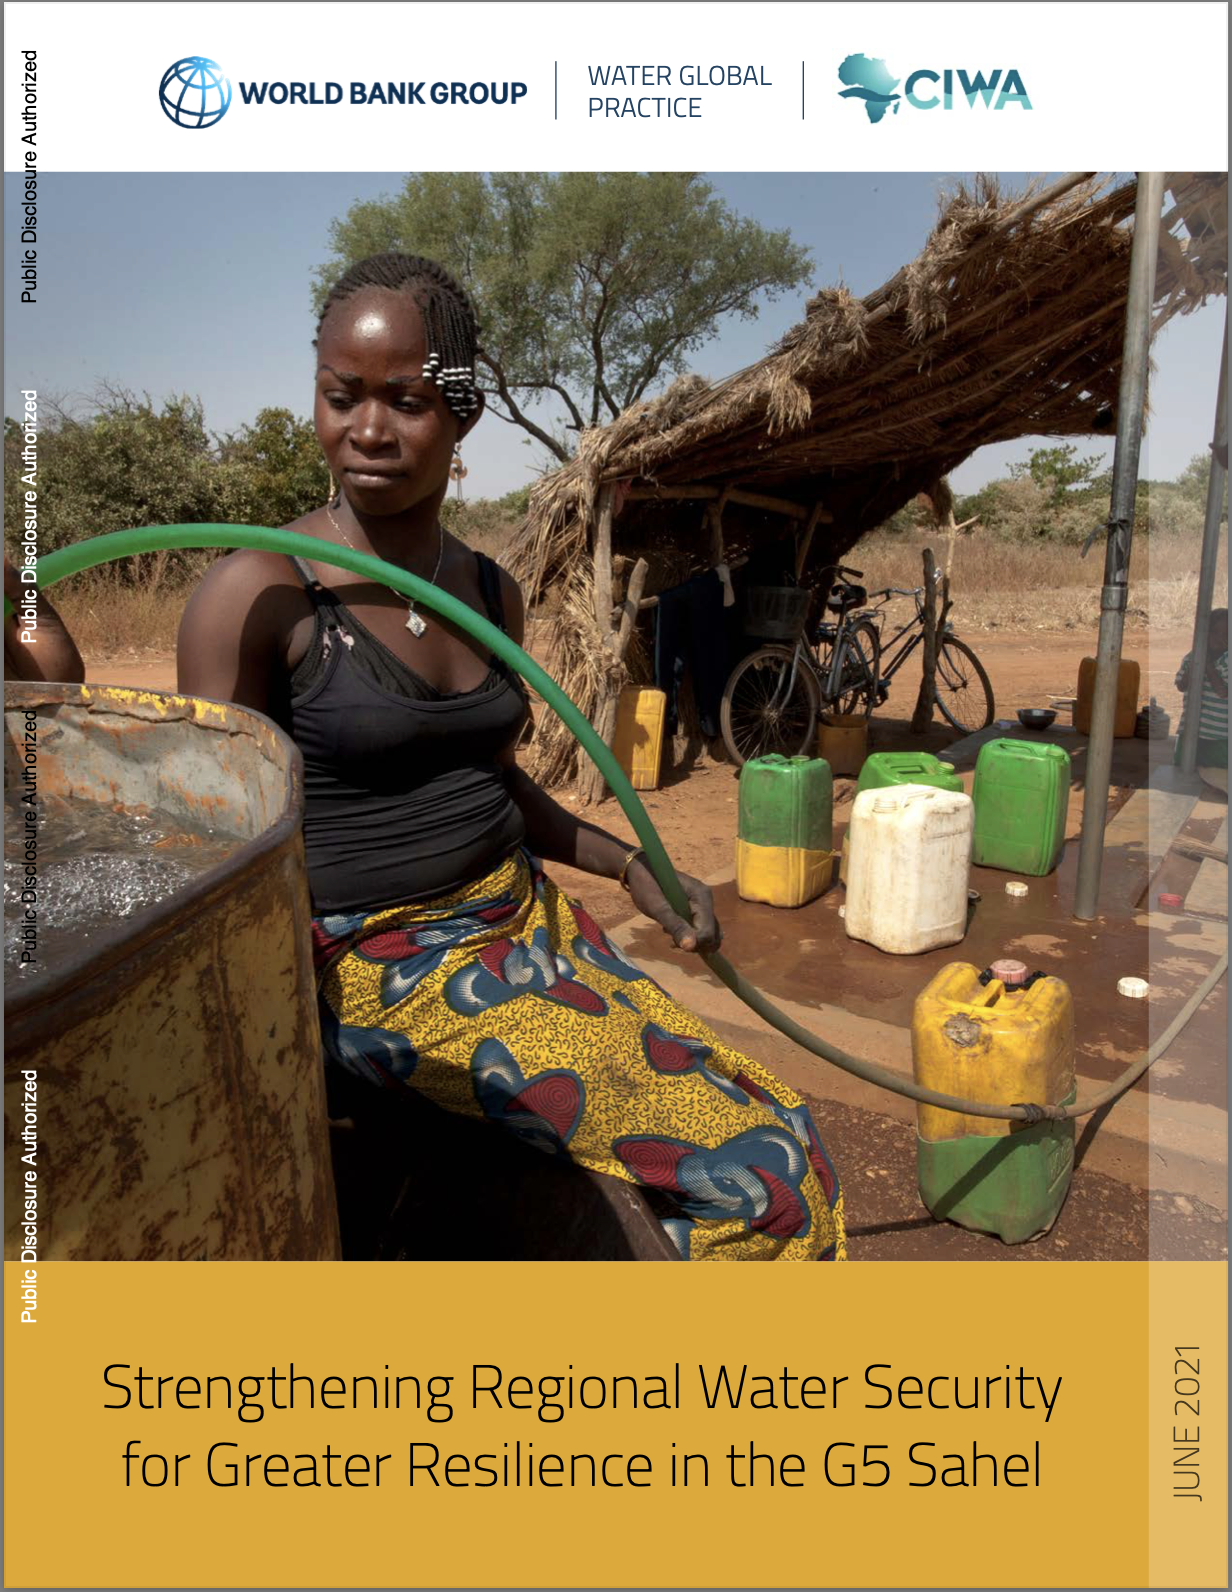 Strengthening Regional Water Security for Greater Resilience in the G5 Sahel